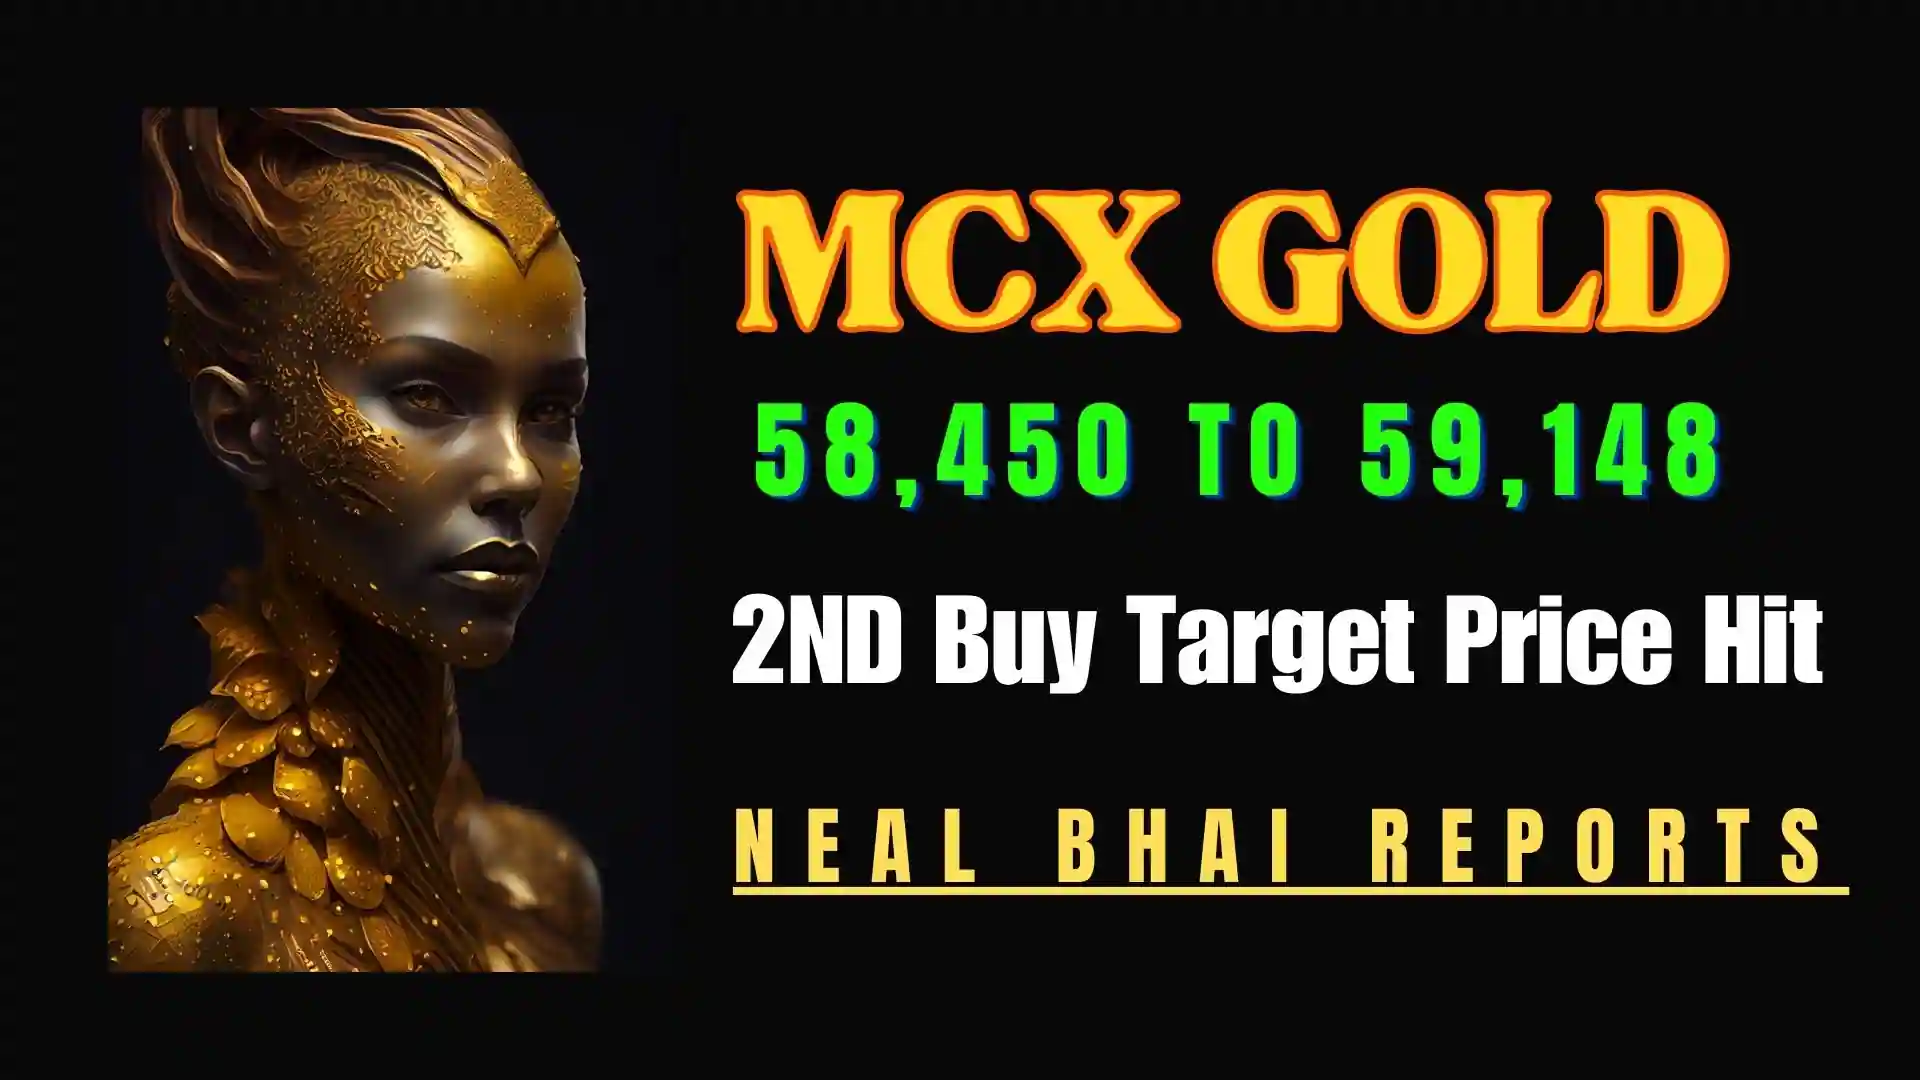 As Expected: MCX Gold 2nd Buy Target Hit, 700 Points, Profit Rs. 70,000 Per Lot, With in 24 Hours